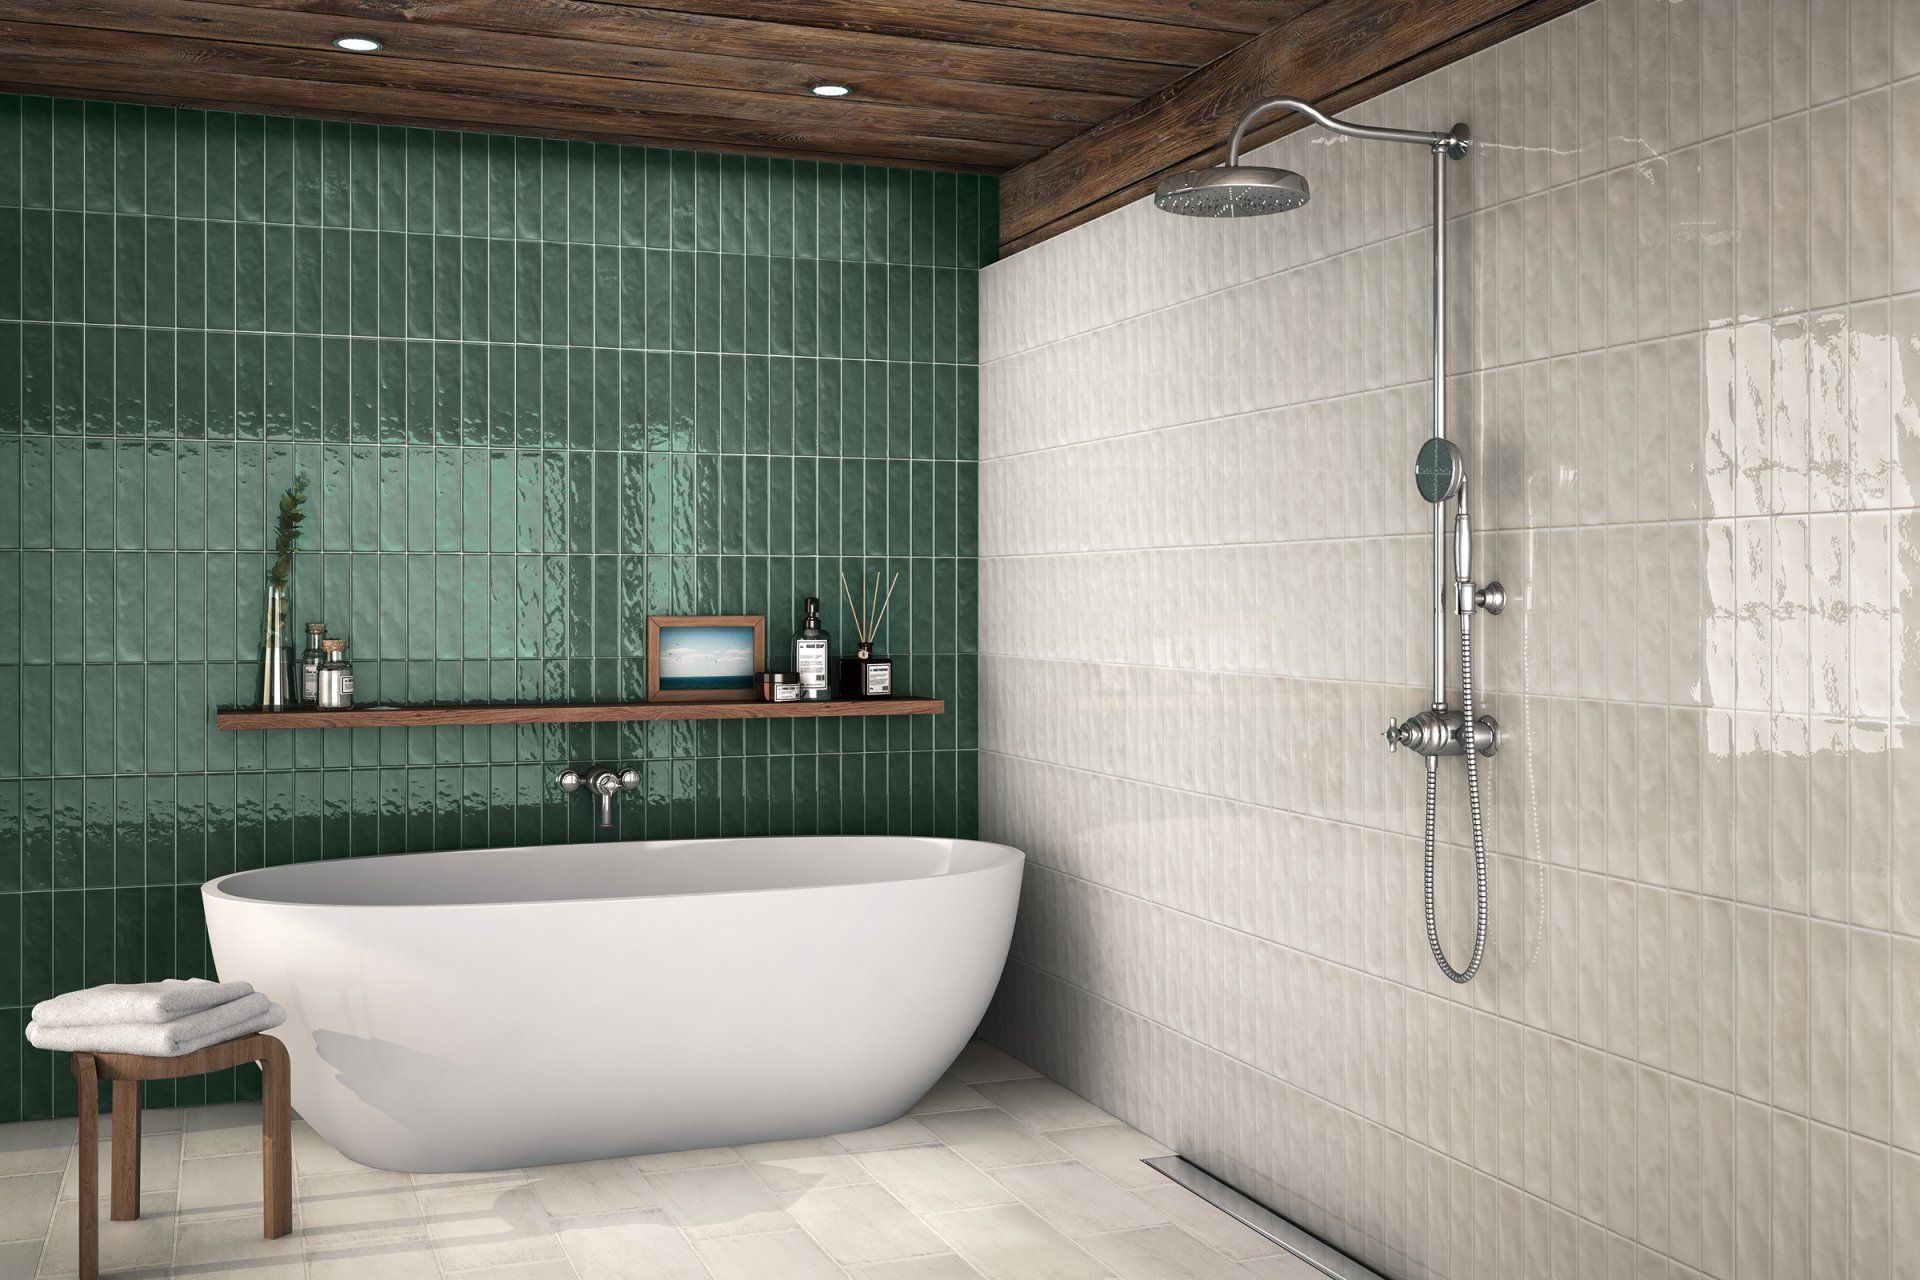 Luxurious, modern bathroom with tile covered walls and flooring